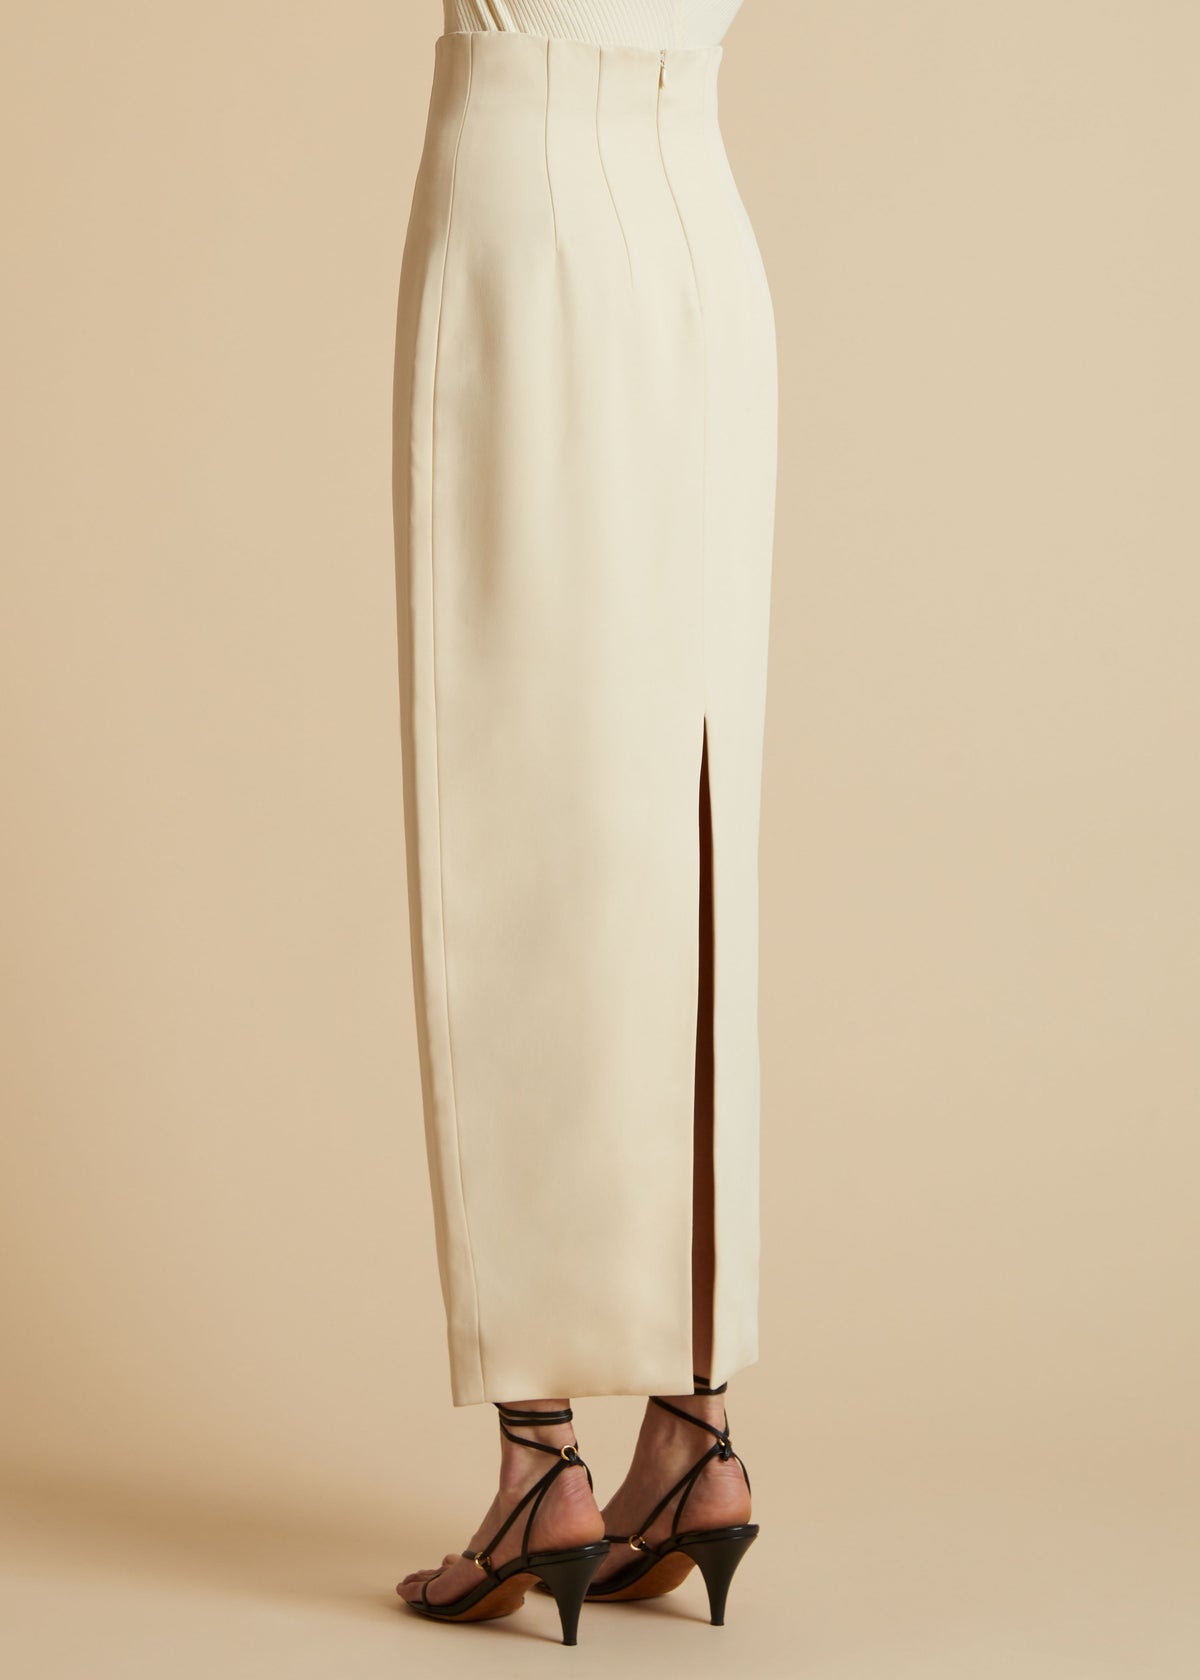 The Loxley Skirt in Bone - 3